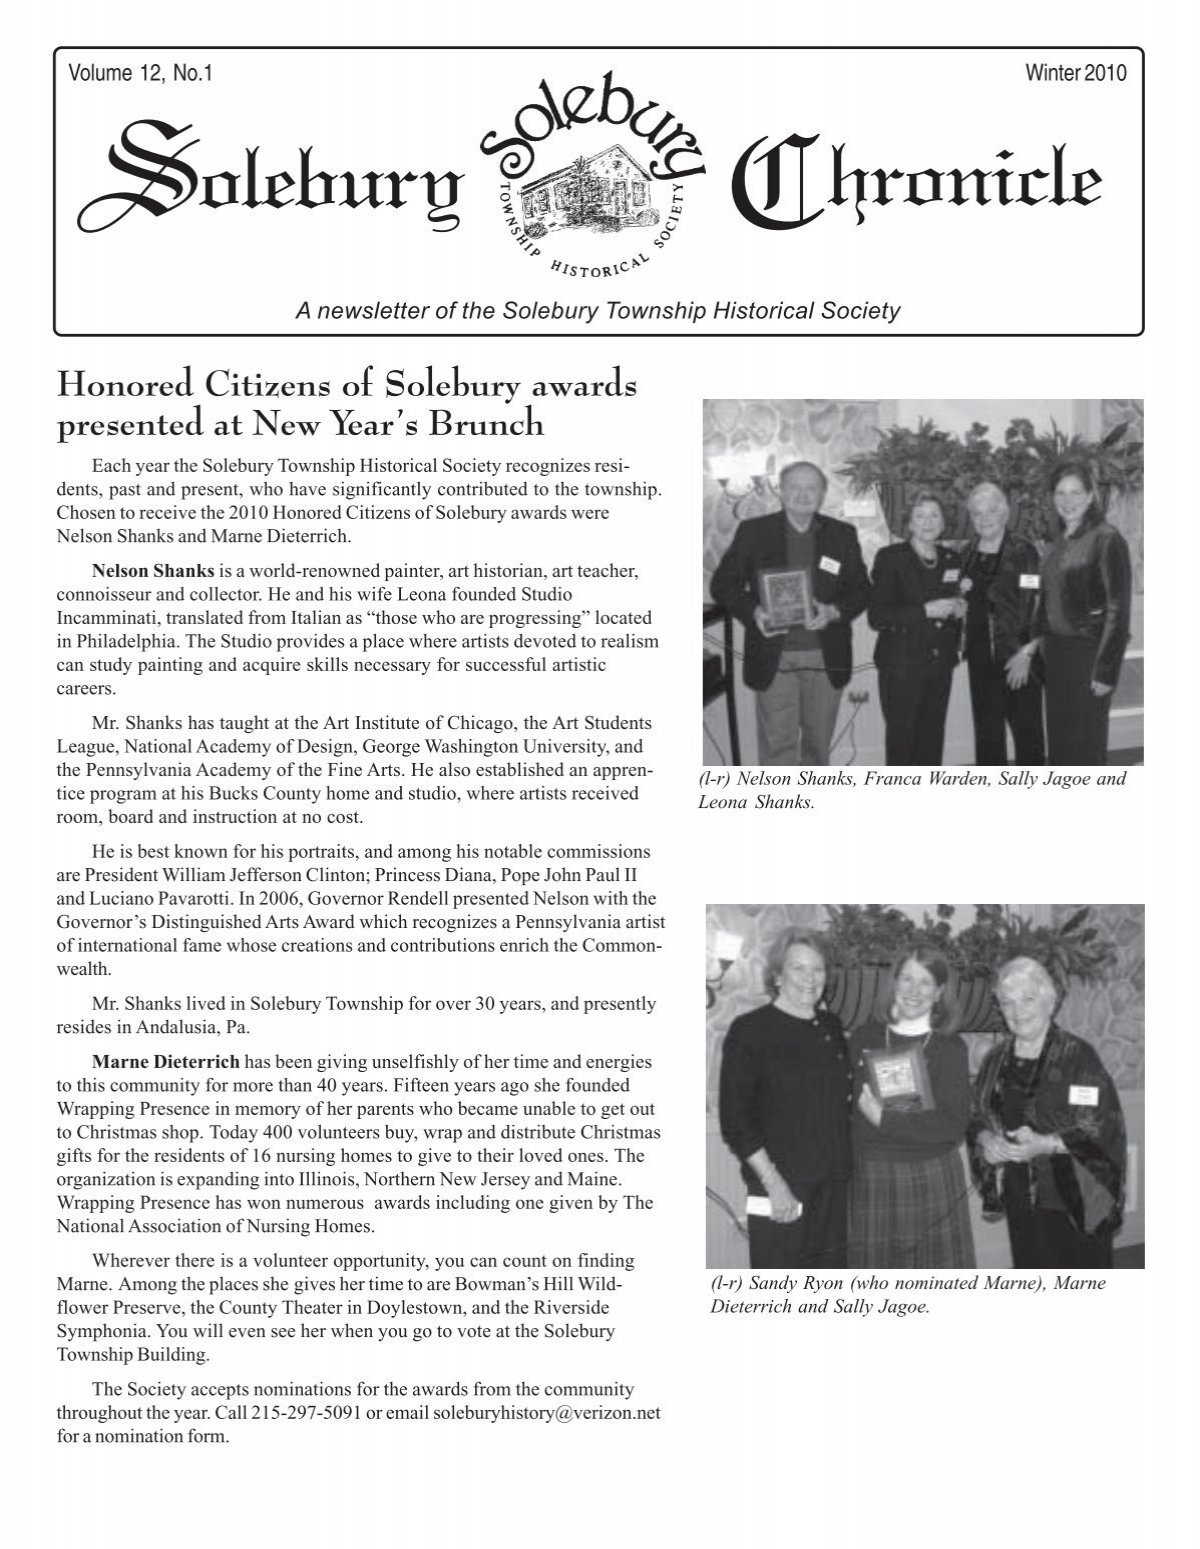 Winter 2010 - Solebury Township Historical Society